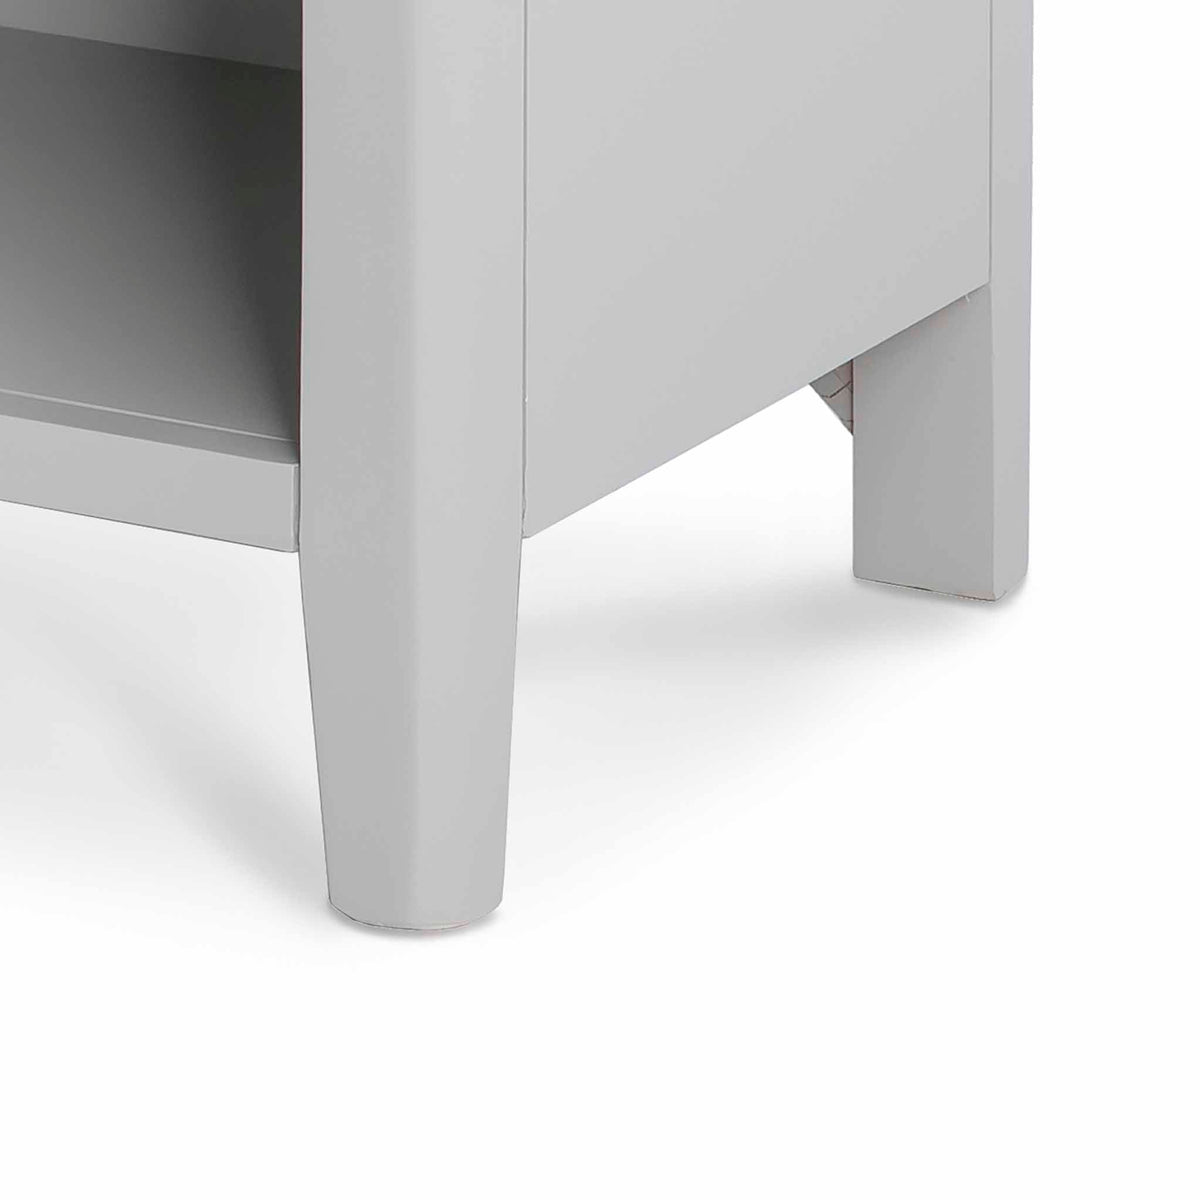 Elgin Grey 120cm large TV stand - Close up of feet